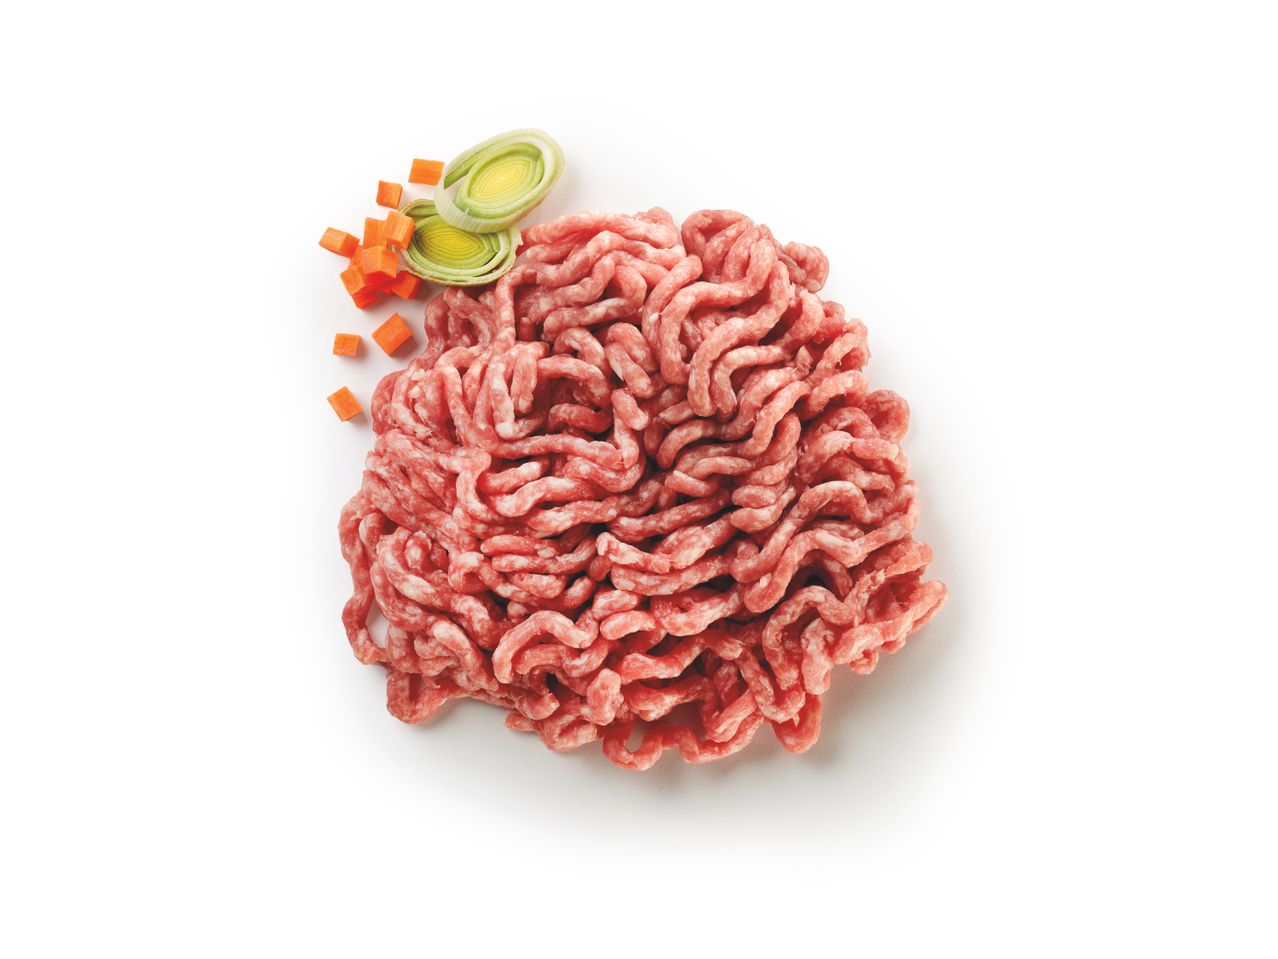 Go to full screen view: Minced Pork - Image 1